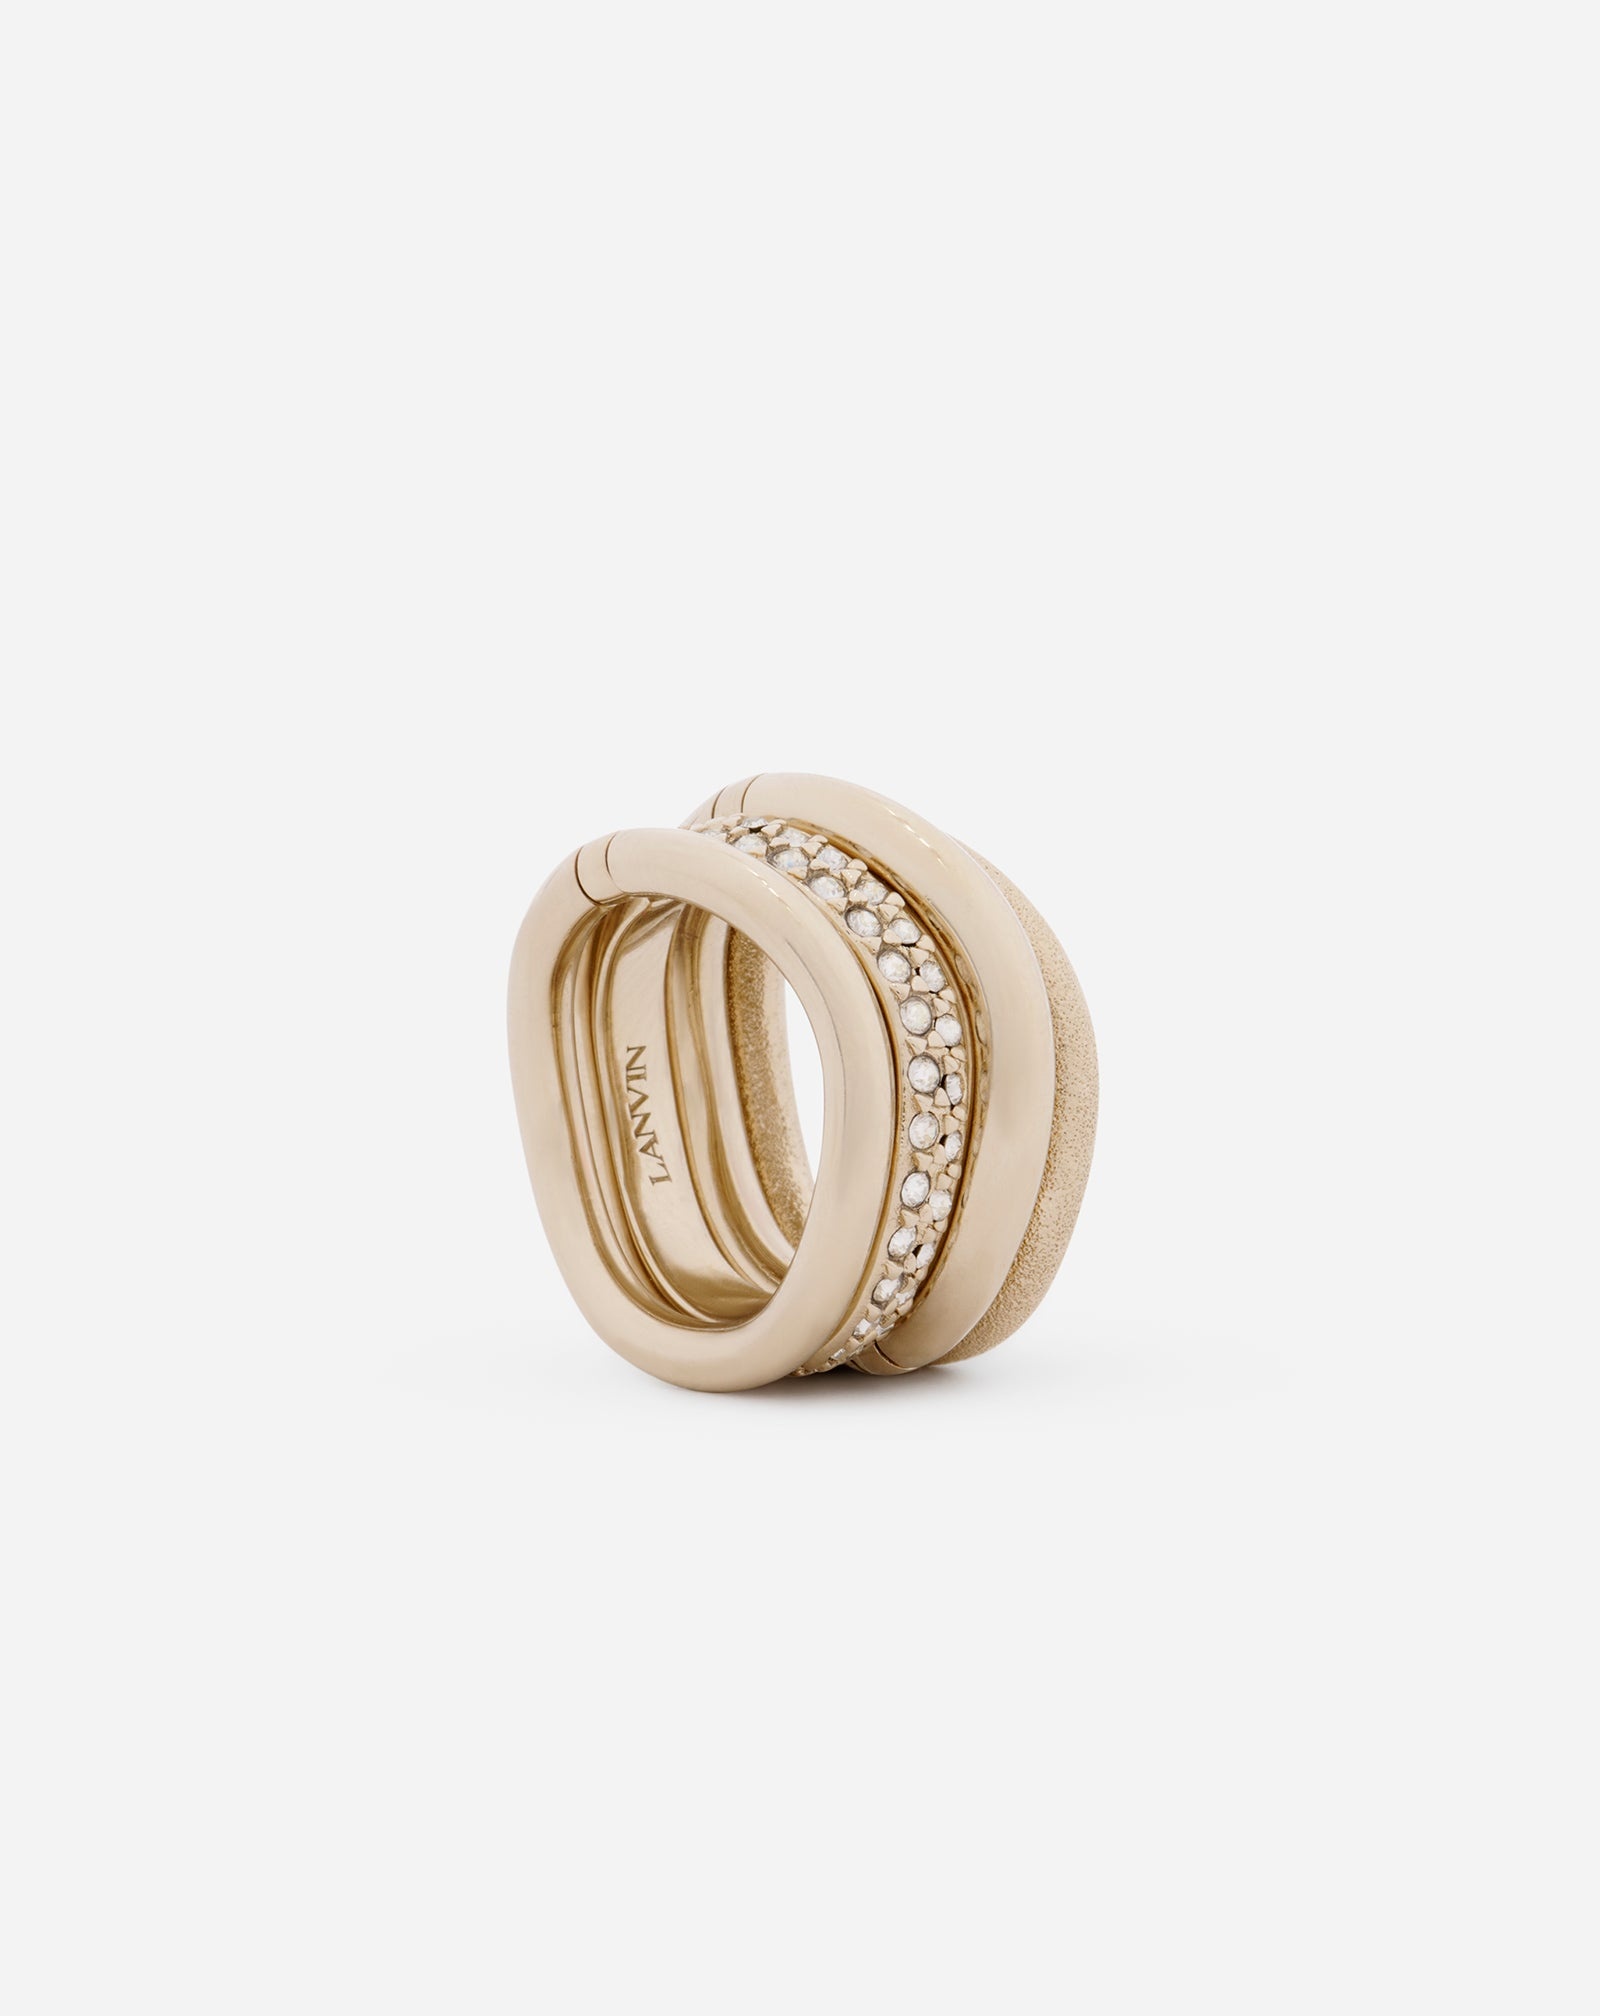 PARTITION BY LANVIN RING - 6